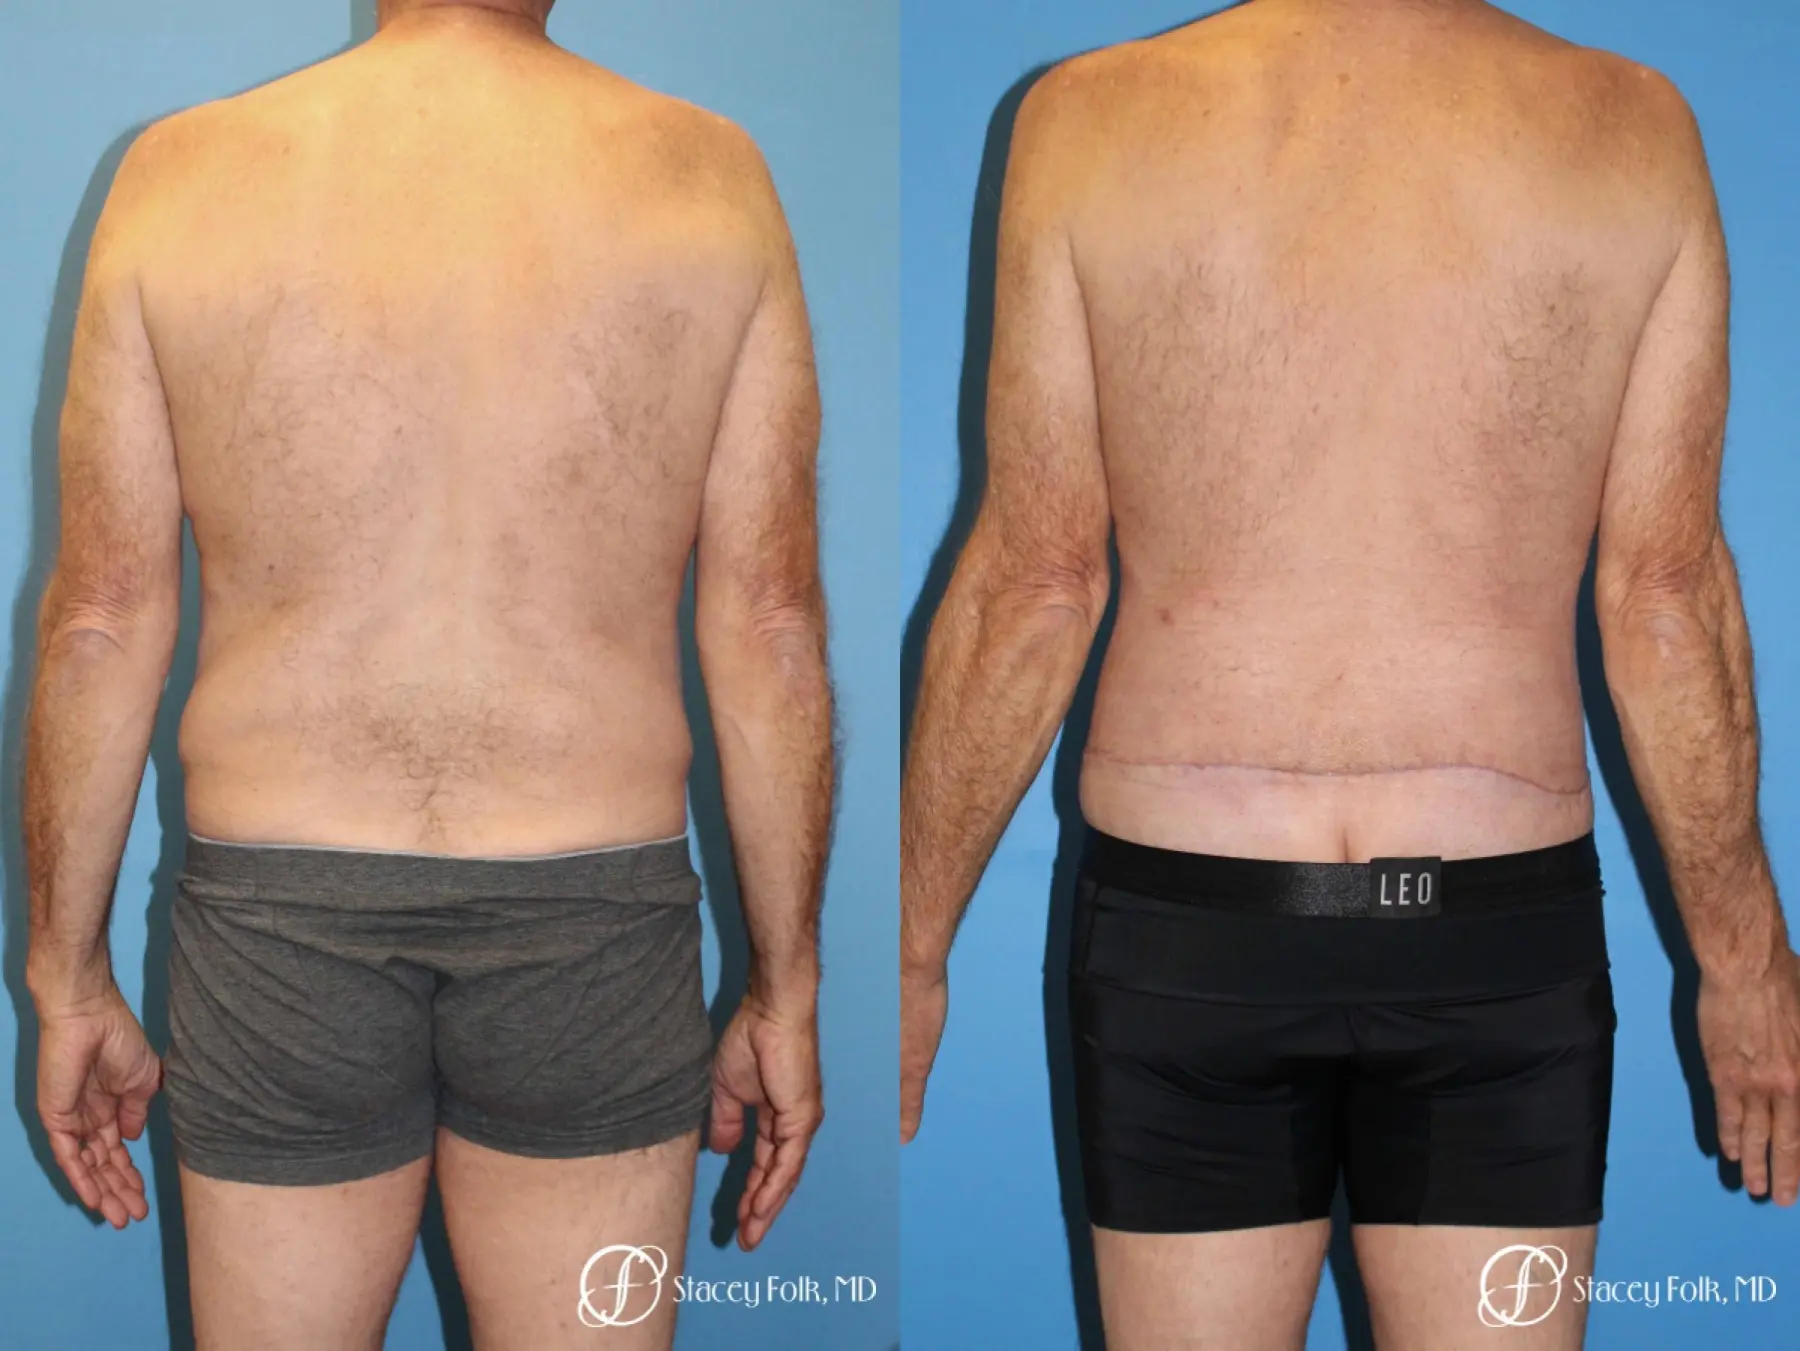 Body Lift Before and After Pictures Case 11523, Denver, CO